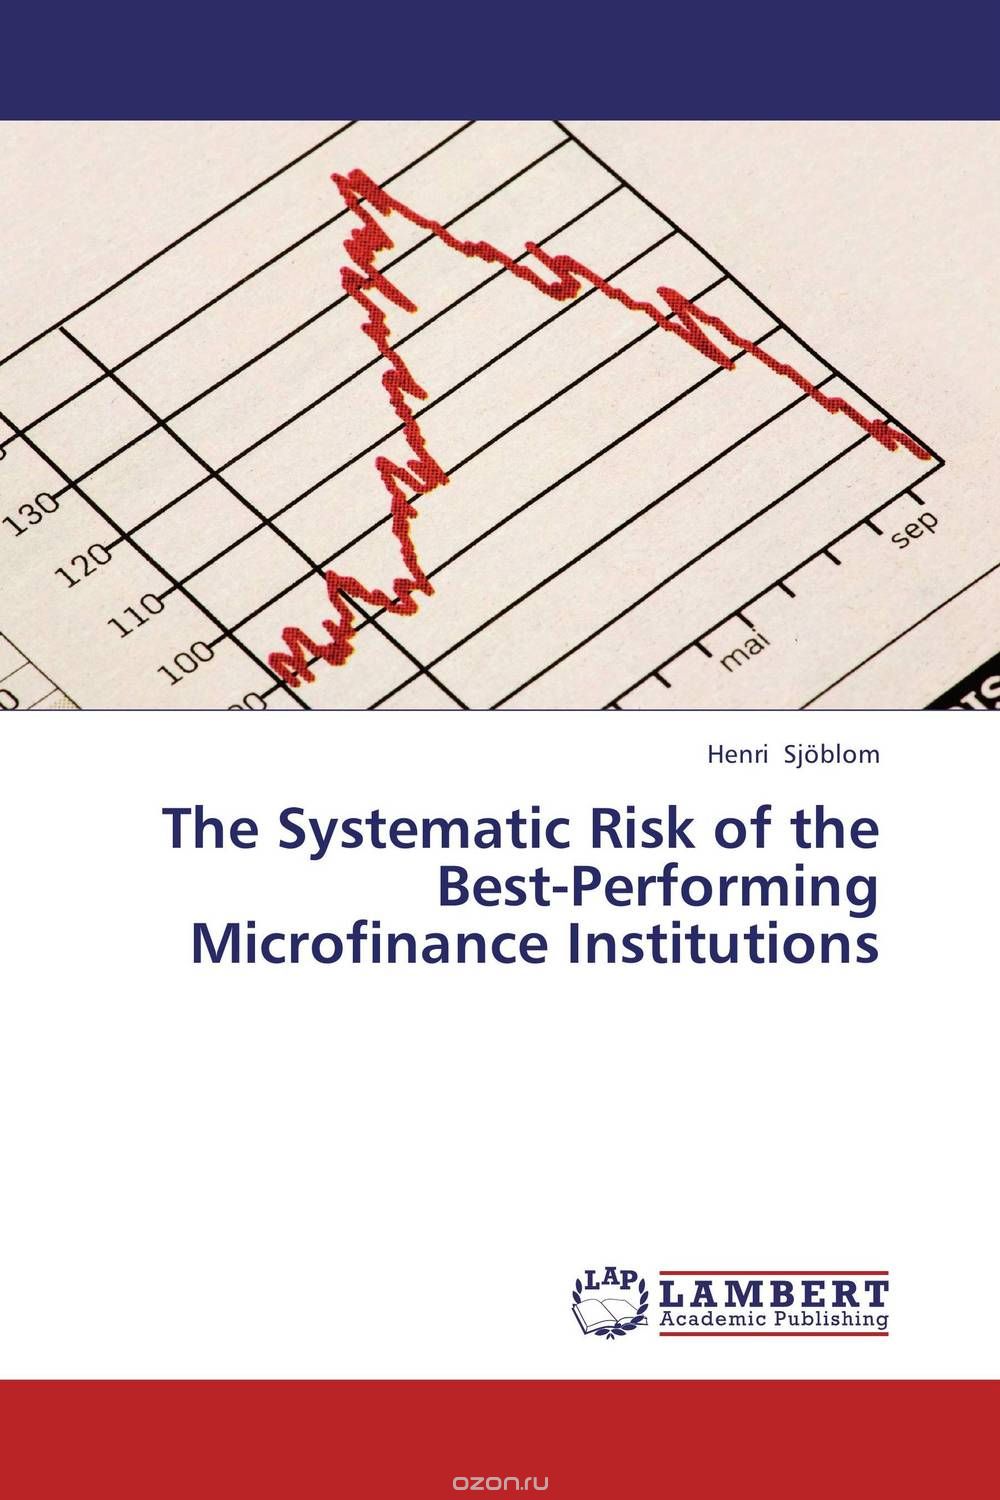 Скачать книгу "The Systematic Risk of the Best-Performing Microfinance Institutions"